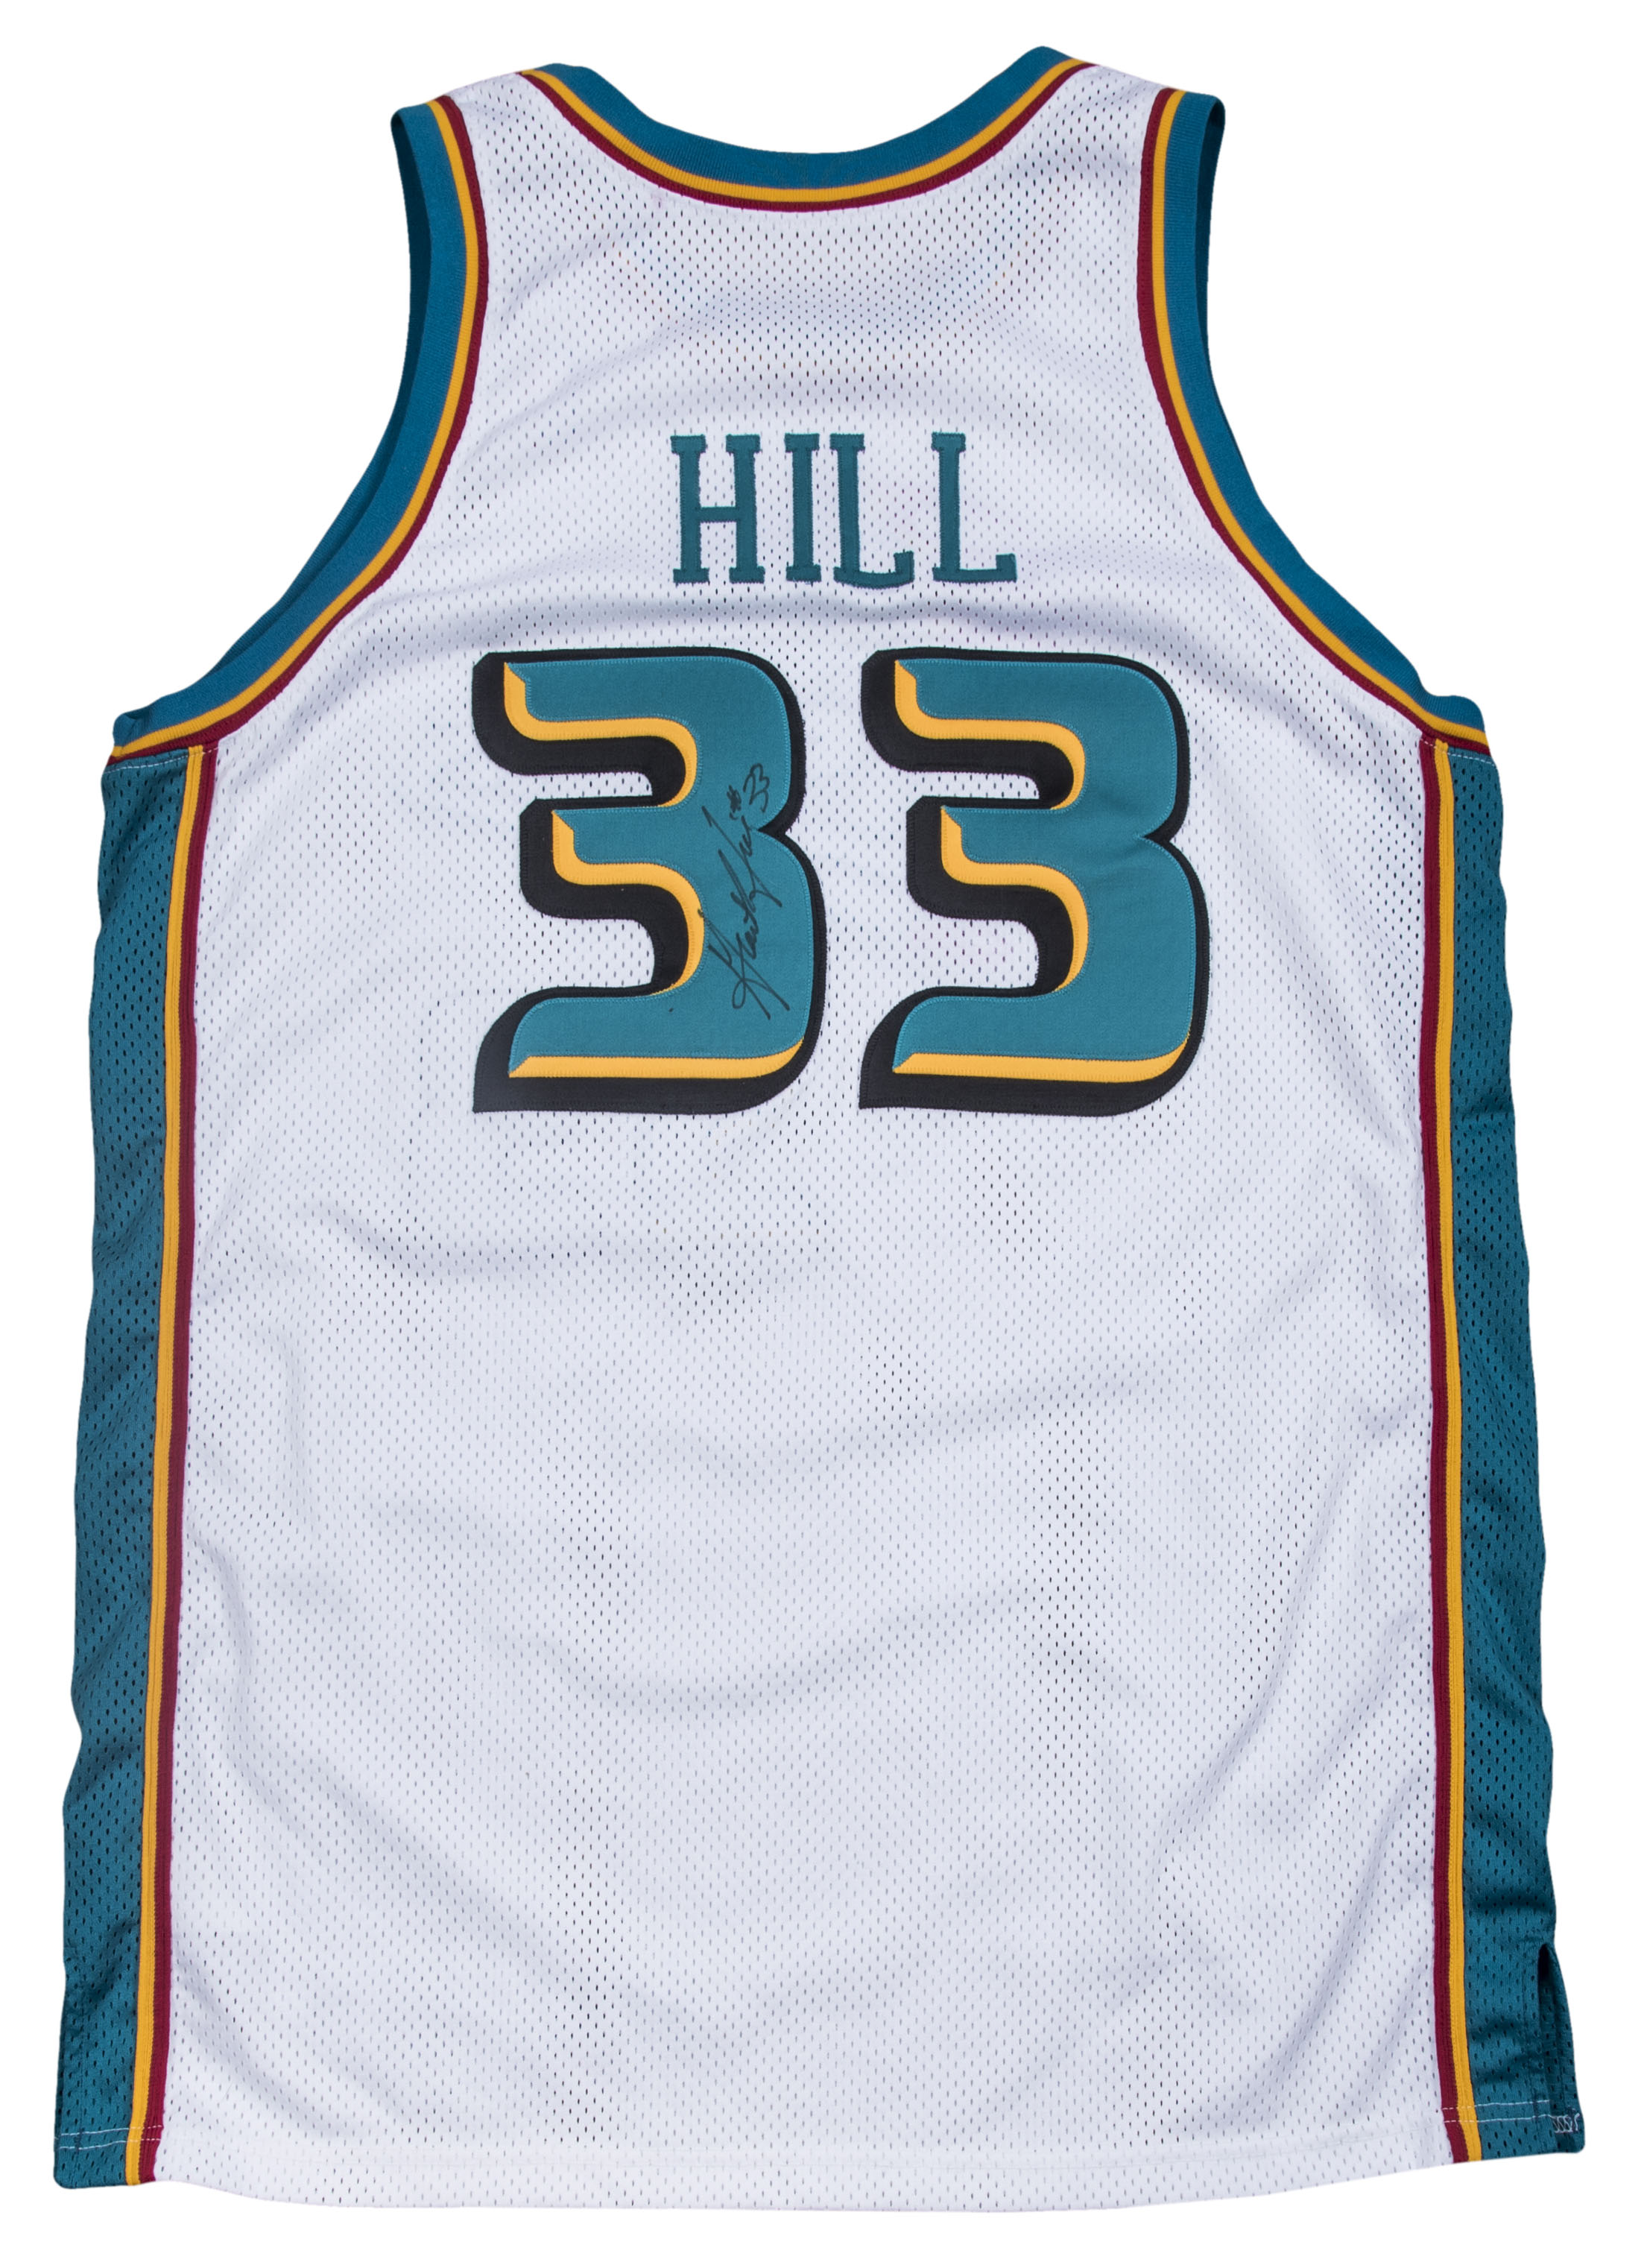 pistons turquoise jersey